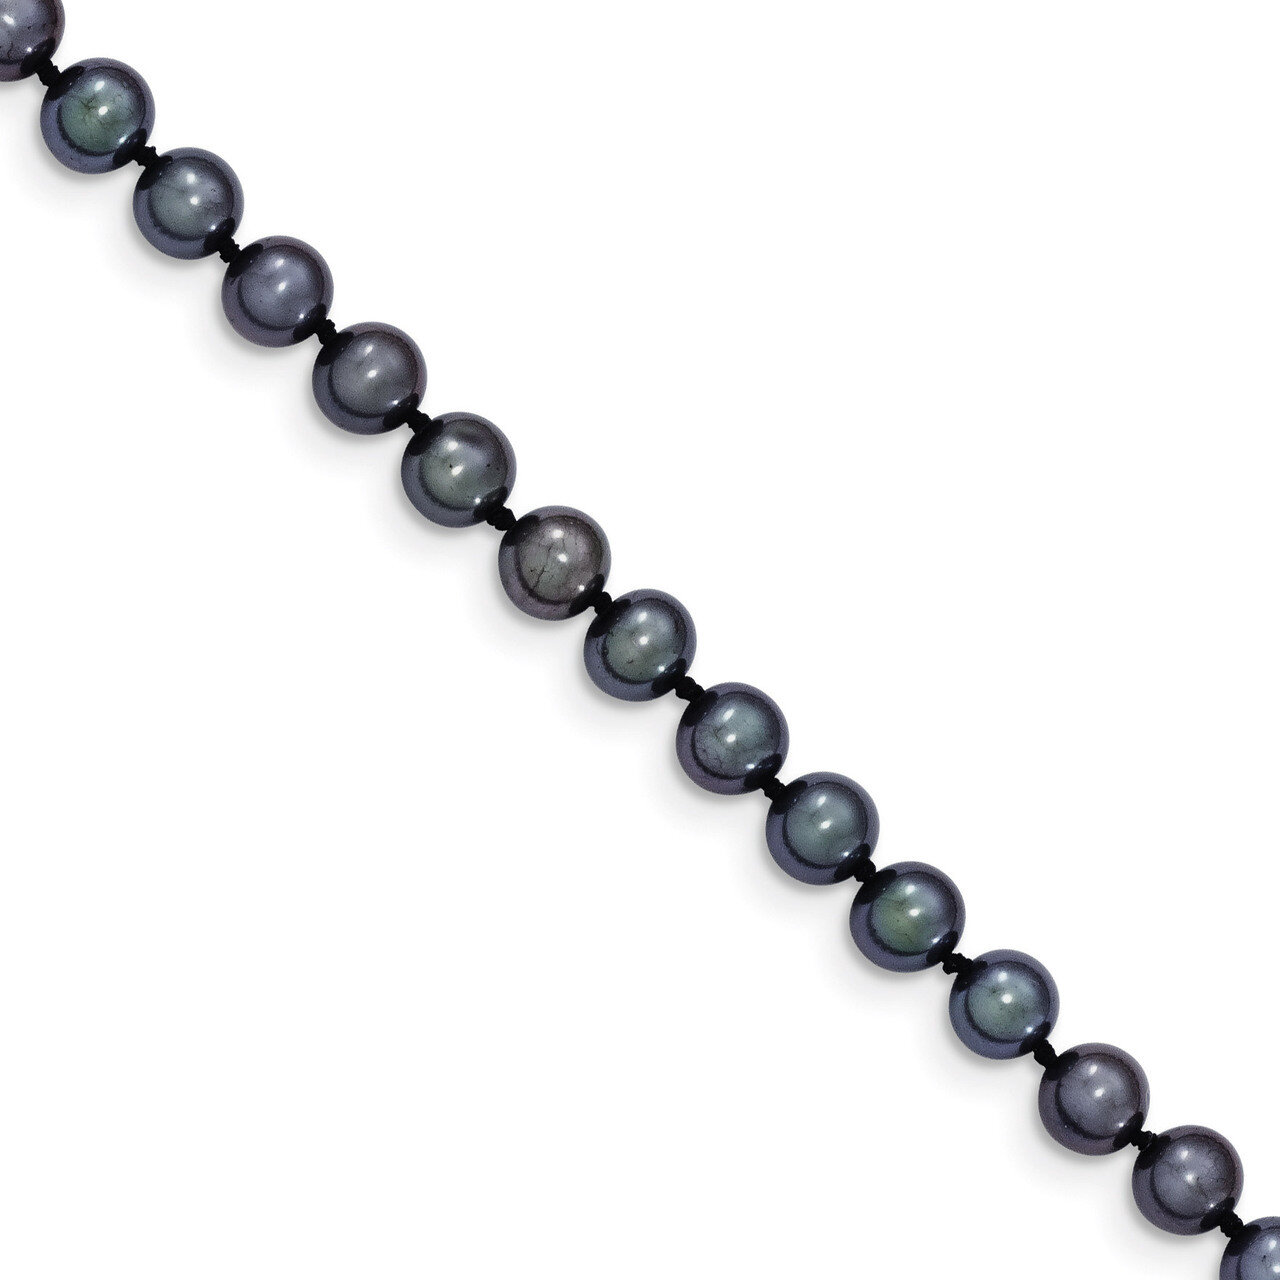 5-6mm Black Cultured Near Round Pearl Necklace 20 Inch 14k Gold BPN050-20